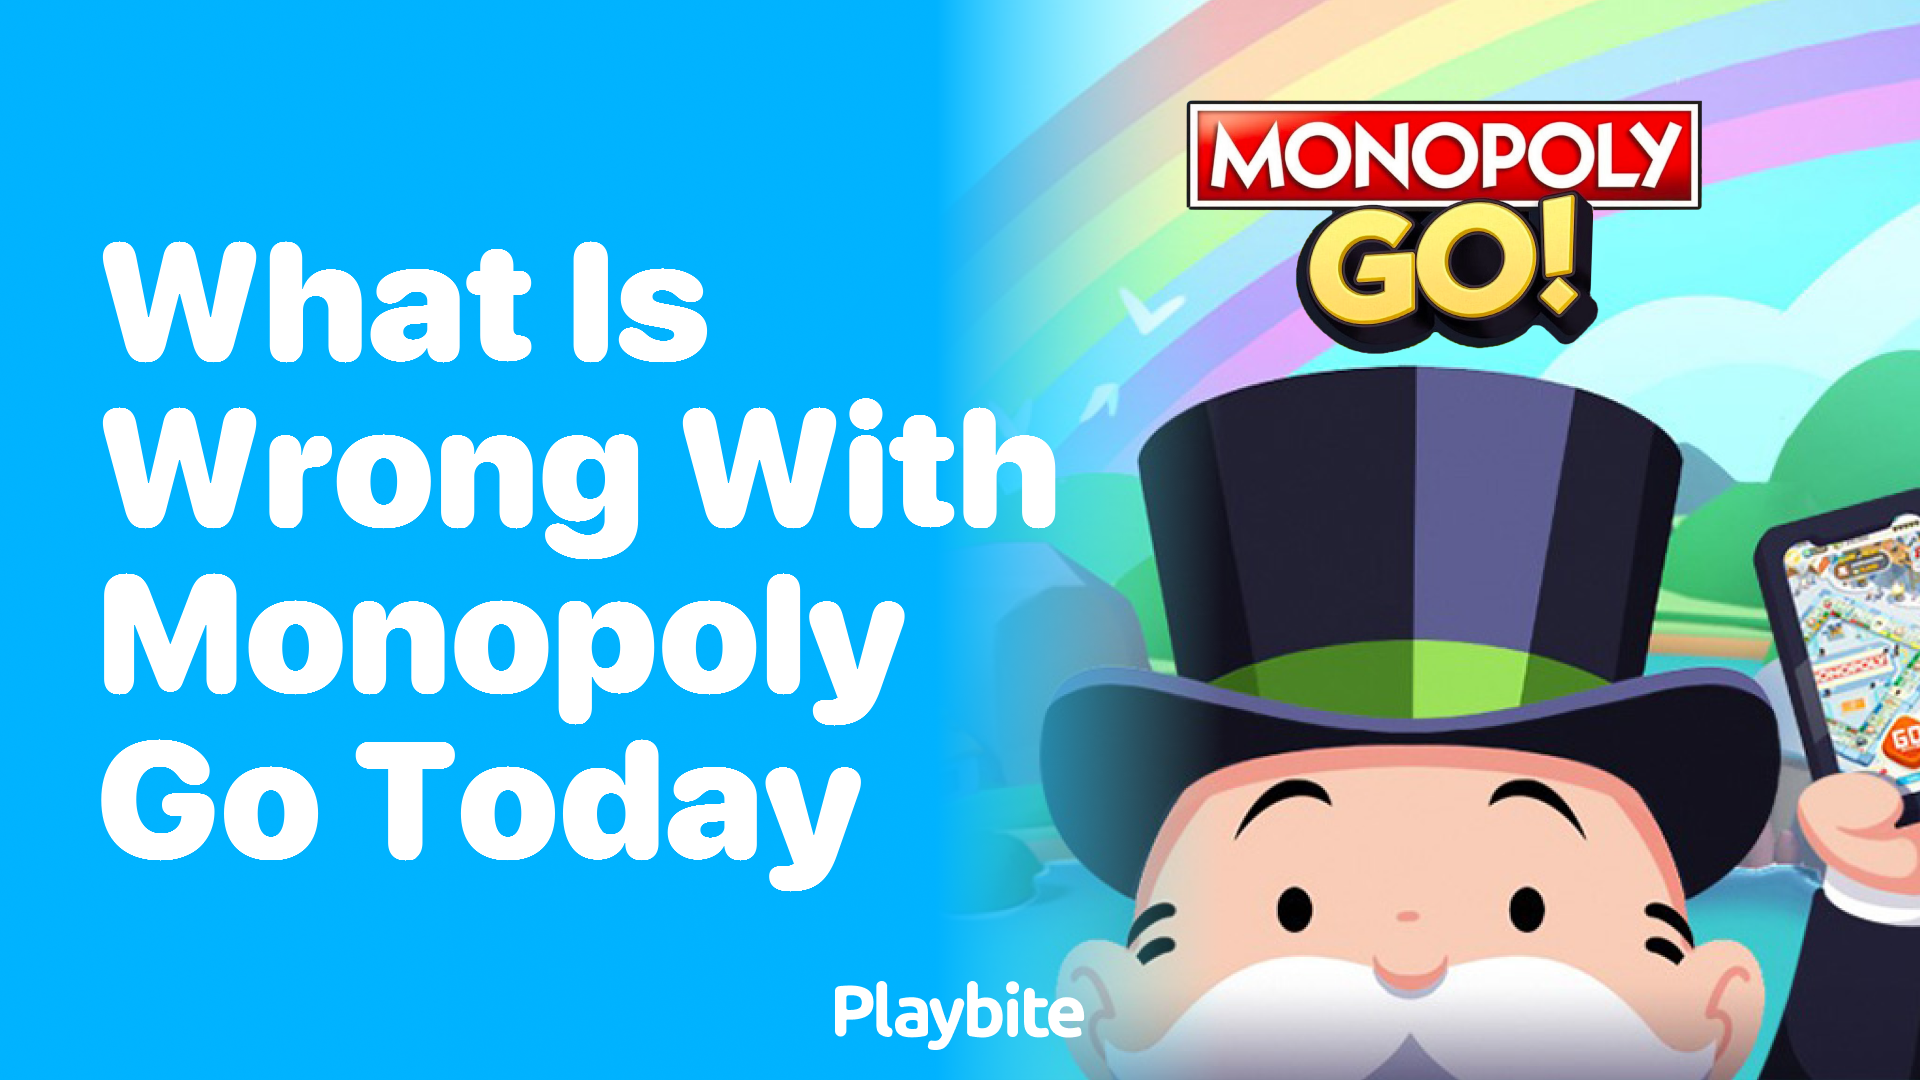 What Is Wrong With Monopoly Go Today?